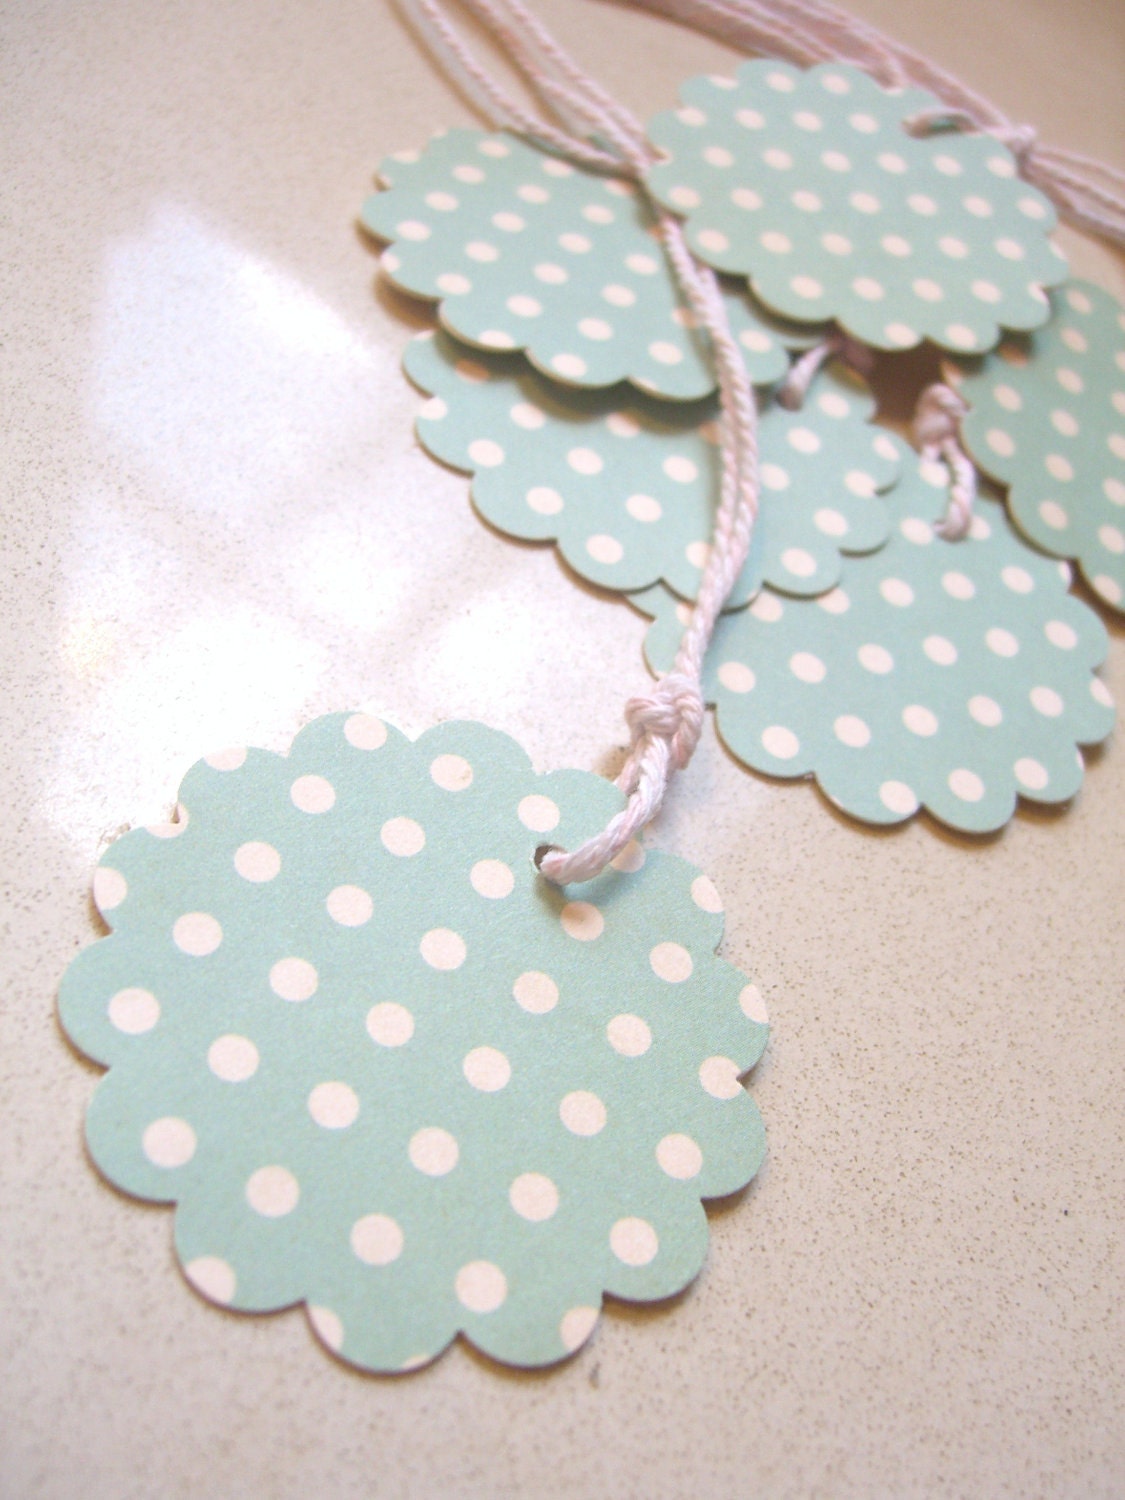 Scalloped Gift Tag - Vintage teal